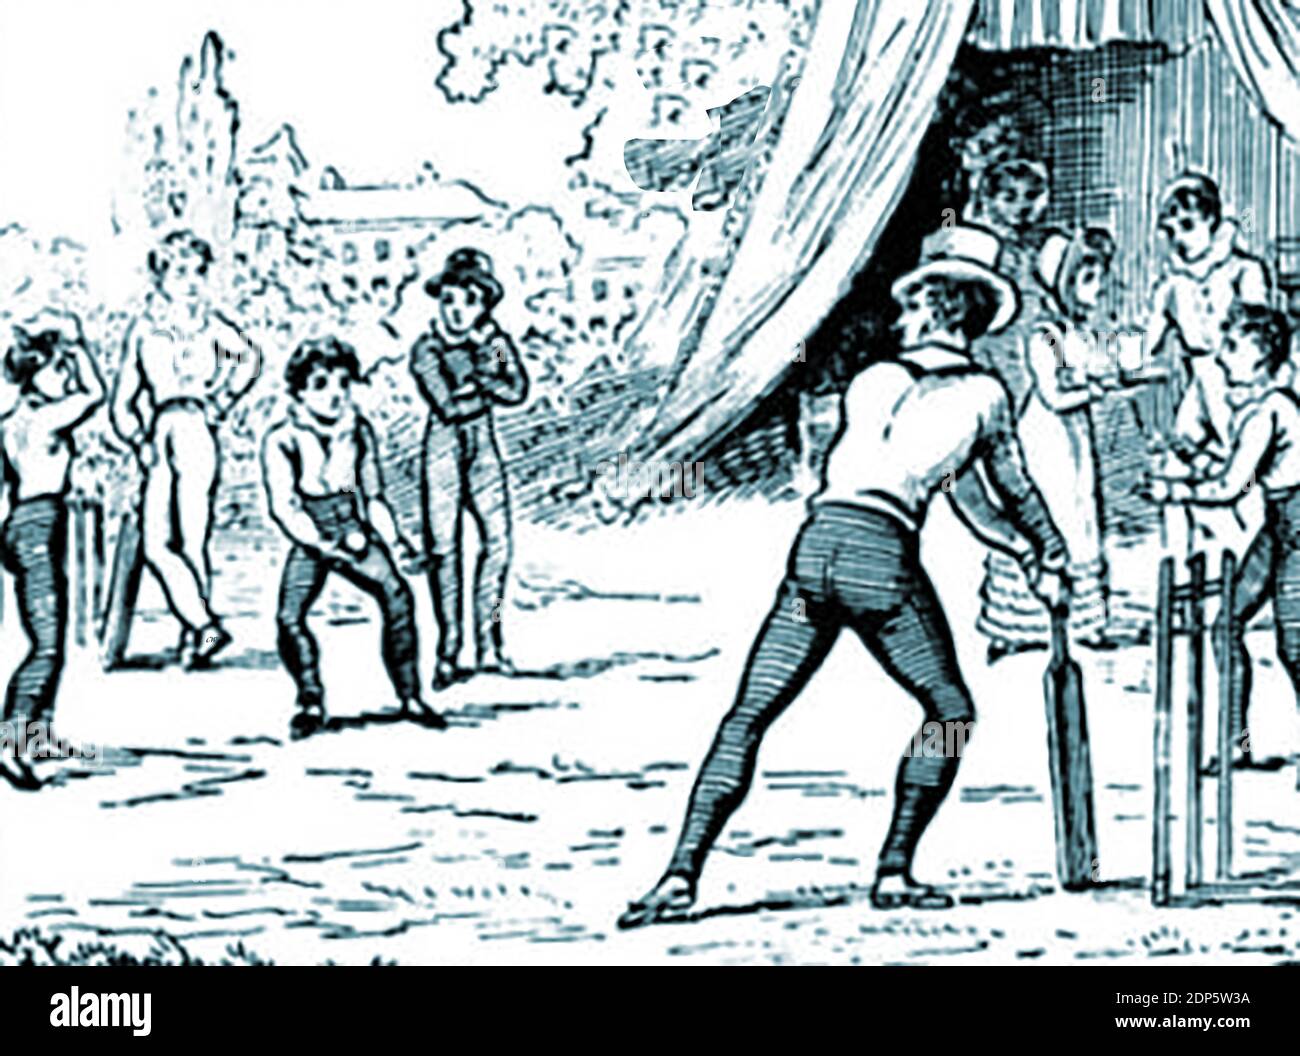 Men and boys playing a game of cricket circa 1770 at an English  country fair - The sport has a long history with the first known mention of it being made in 1550 in evidence given at a legal case at Guildford, Surrey, regarding the use of a parcel of land . A coroner  John Derrick, testified that he had played cricket on that land as a boy. The players in this picture appear to date after the late 1760's as the ball was bowled along the ground until that time when the sport was considered not only a leisure activity, but also a  gambling opportunity Stock Photo